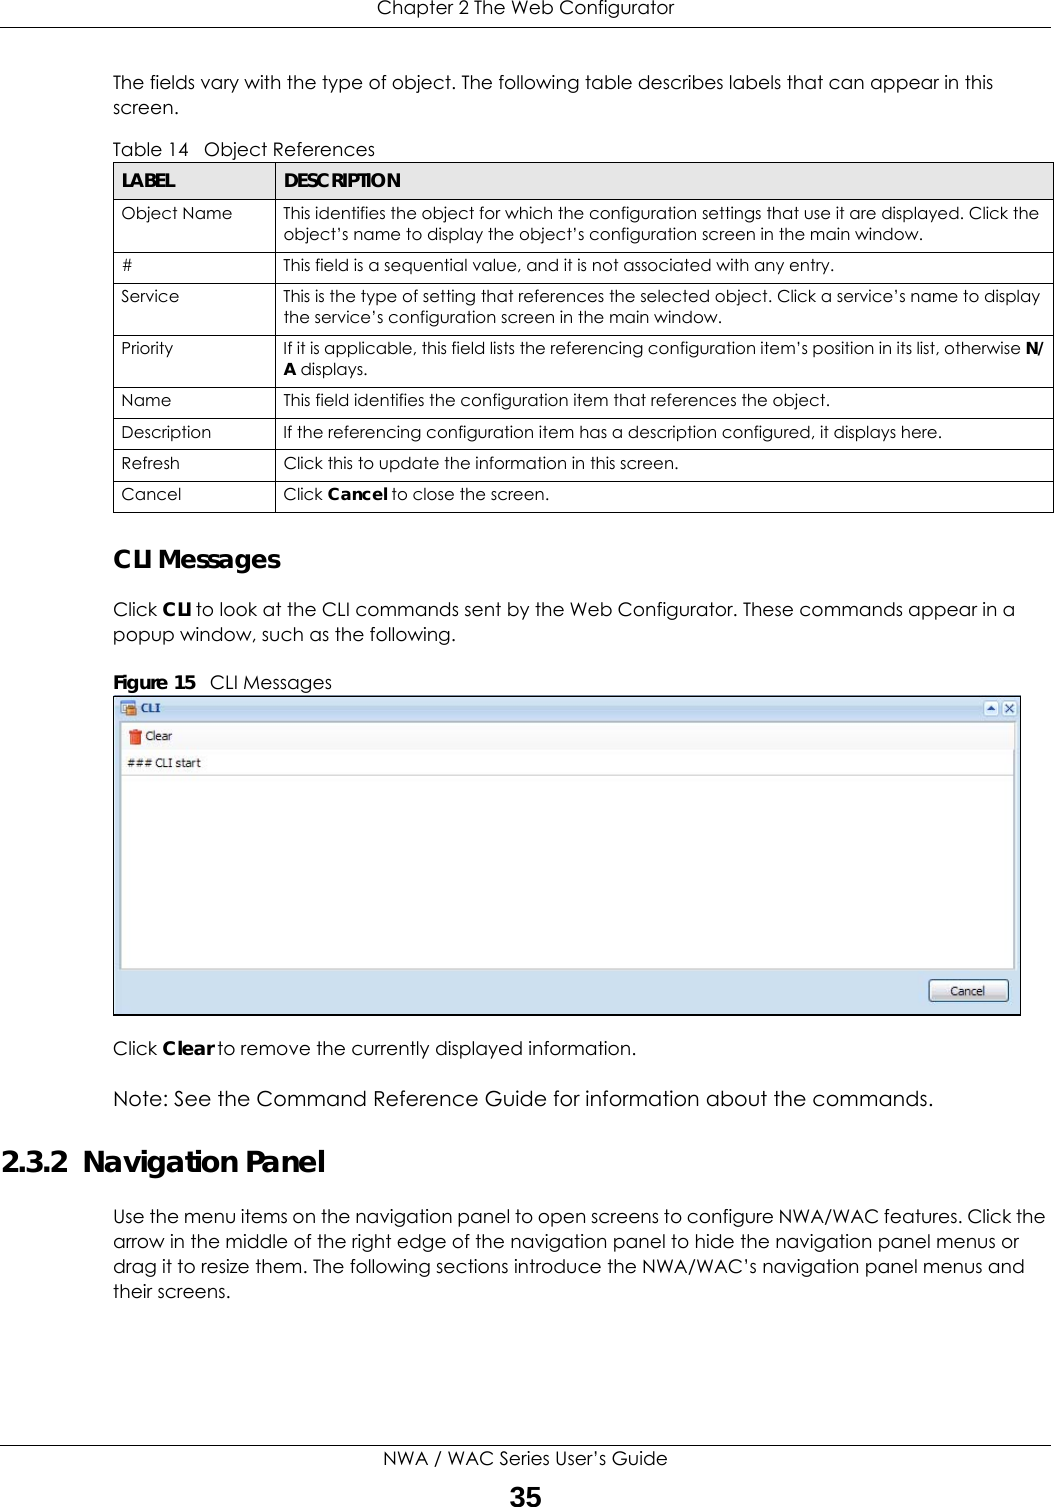 Chapter 2 The Web ConfiguratorNWA / WAC Series User’s Guide35The fields vary with the type of object. The following table describes labels that can appear in this screen.CLI MessagesClick CLI to look at the CLI commands sent by the Web Configurator. These commands appear in a popup window, such as the following.Figure 15   CLI MessagesClick Clear to remove the currently displayed information.Note: See the Command Reference Guide for information about the commands.2.3.2  Navigation PanelUse the menu items on the navigation panel to open screens to configure NWA/WAC features. Click the arrow in the middle of the right edge of the navigation panel to hide the navigation panel menus or drag it to resize them. The following sections introduce the NWA/WAC’s navigation panel menus and their screens.Table 14   Object ReferencesLABEL DESCRIPTIONObject Name This identifies the object for which the configuration settings that use it are displayed. Click the object’s name to display the object’s configuration screen in the main window.# This field is a sequential value, and it is not associated with any entry.Service This is the type of setting that references the selected object. Click a service’s name to display the service’s configuration screen in the main window.Priority If it is applicable, this field lists the referencing configuration item’s position in its list, otherwise N/A displays.Name This field identifies the configuration item that references the object.Description If the referencing configuration item has a description configured, it displays here. Refresh Click this to update the information in this screen.Cancel Click Cancel to close the screen.